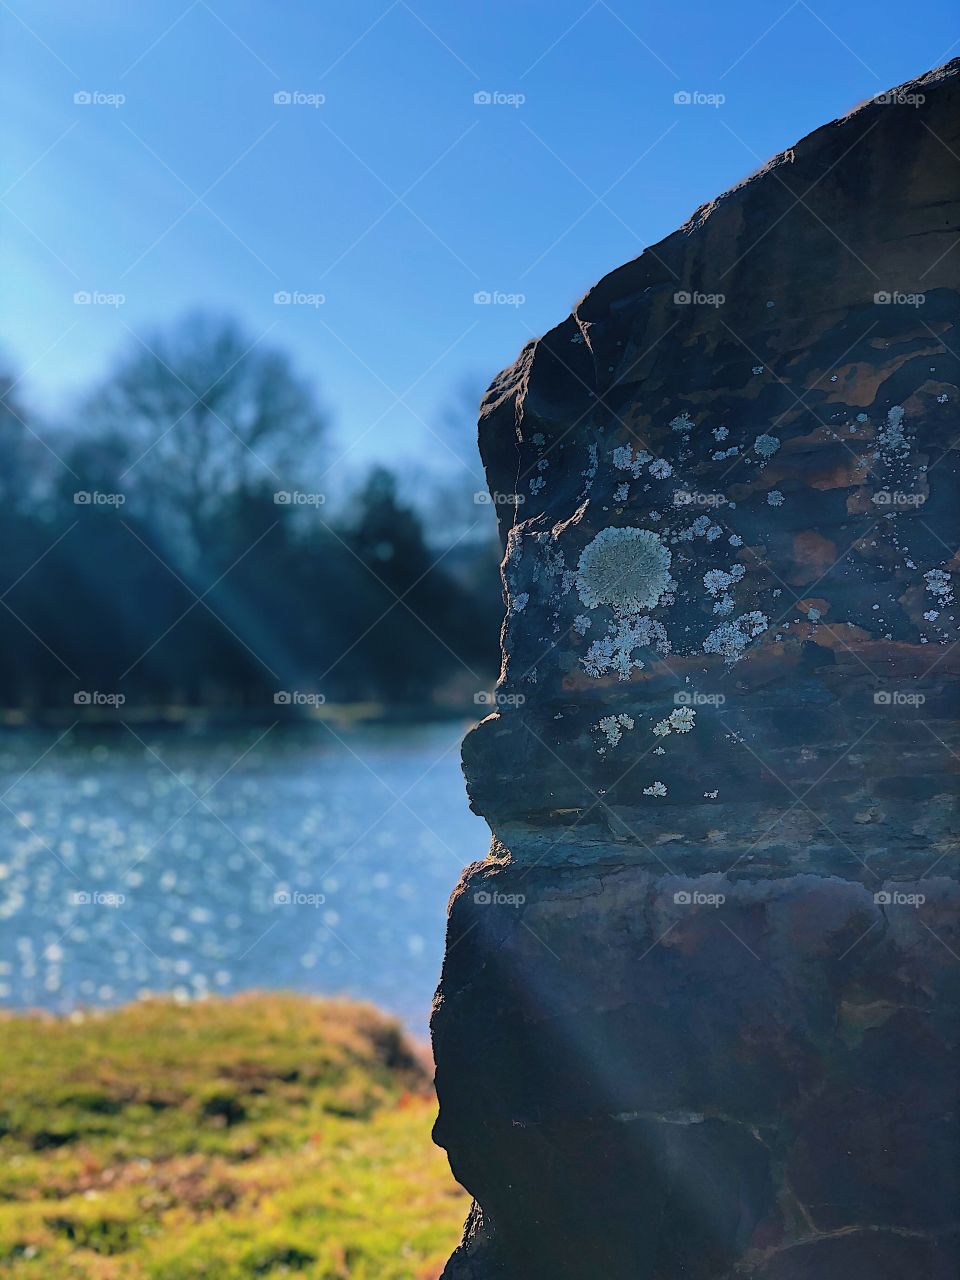 Rock by a lake, landscape of New York, New York wooded area, forest and lakes of New York, Catskills area of New York, landscape beauty, focused point of view, nature photography 